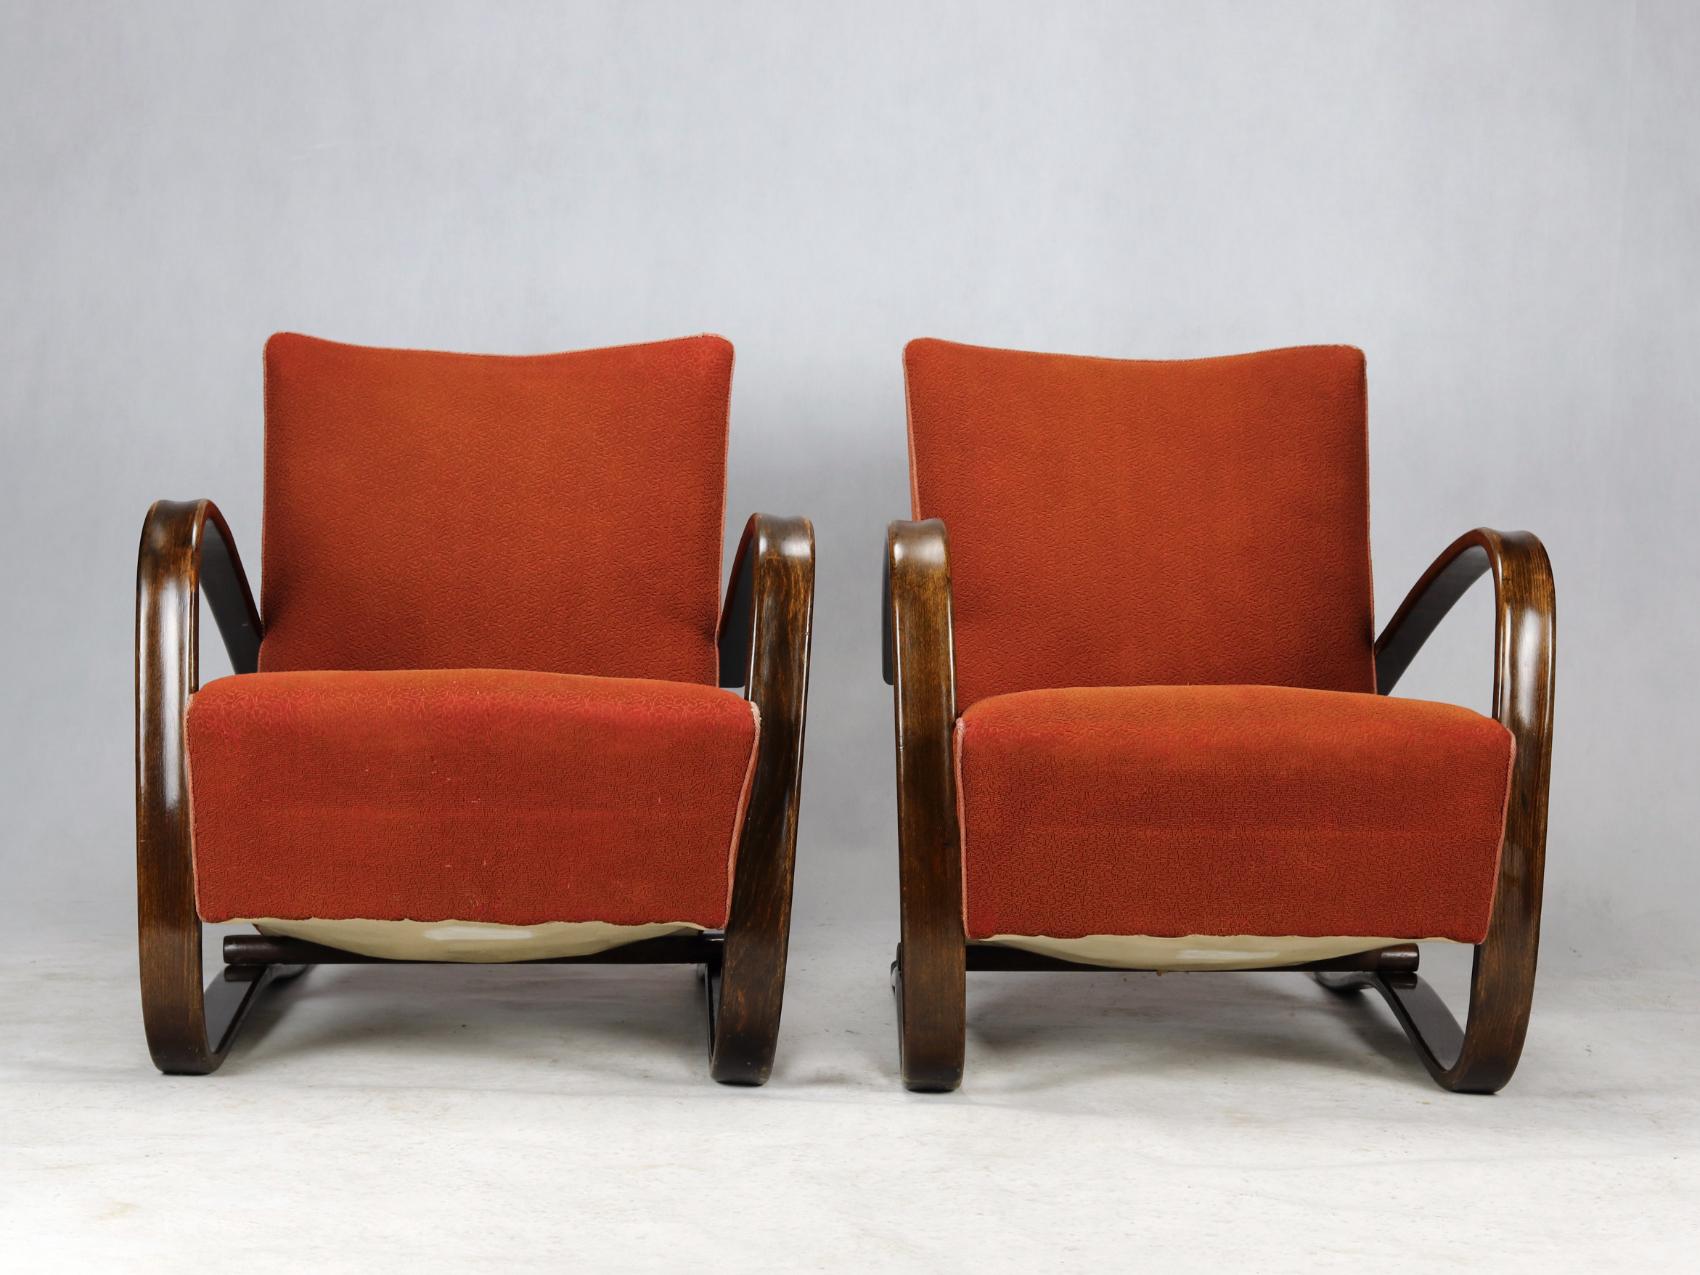 Pair of iconic H-269 lounge chairs by Jindrich Halabala for Up Závody Brno in good, original condition,
Czechoslovakia, 1930s.
 